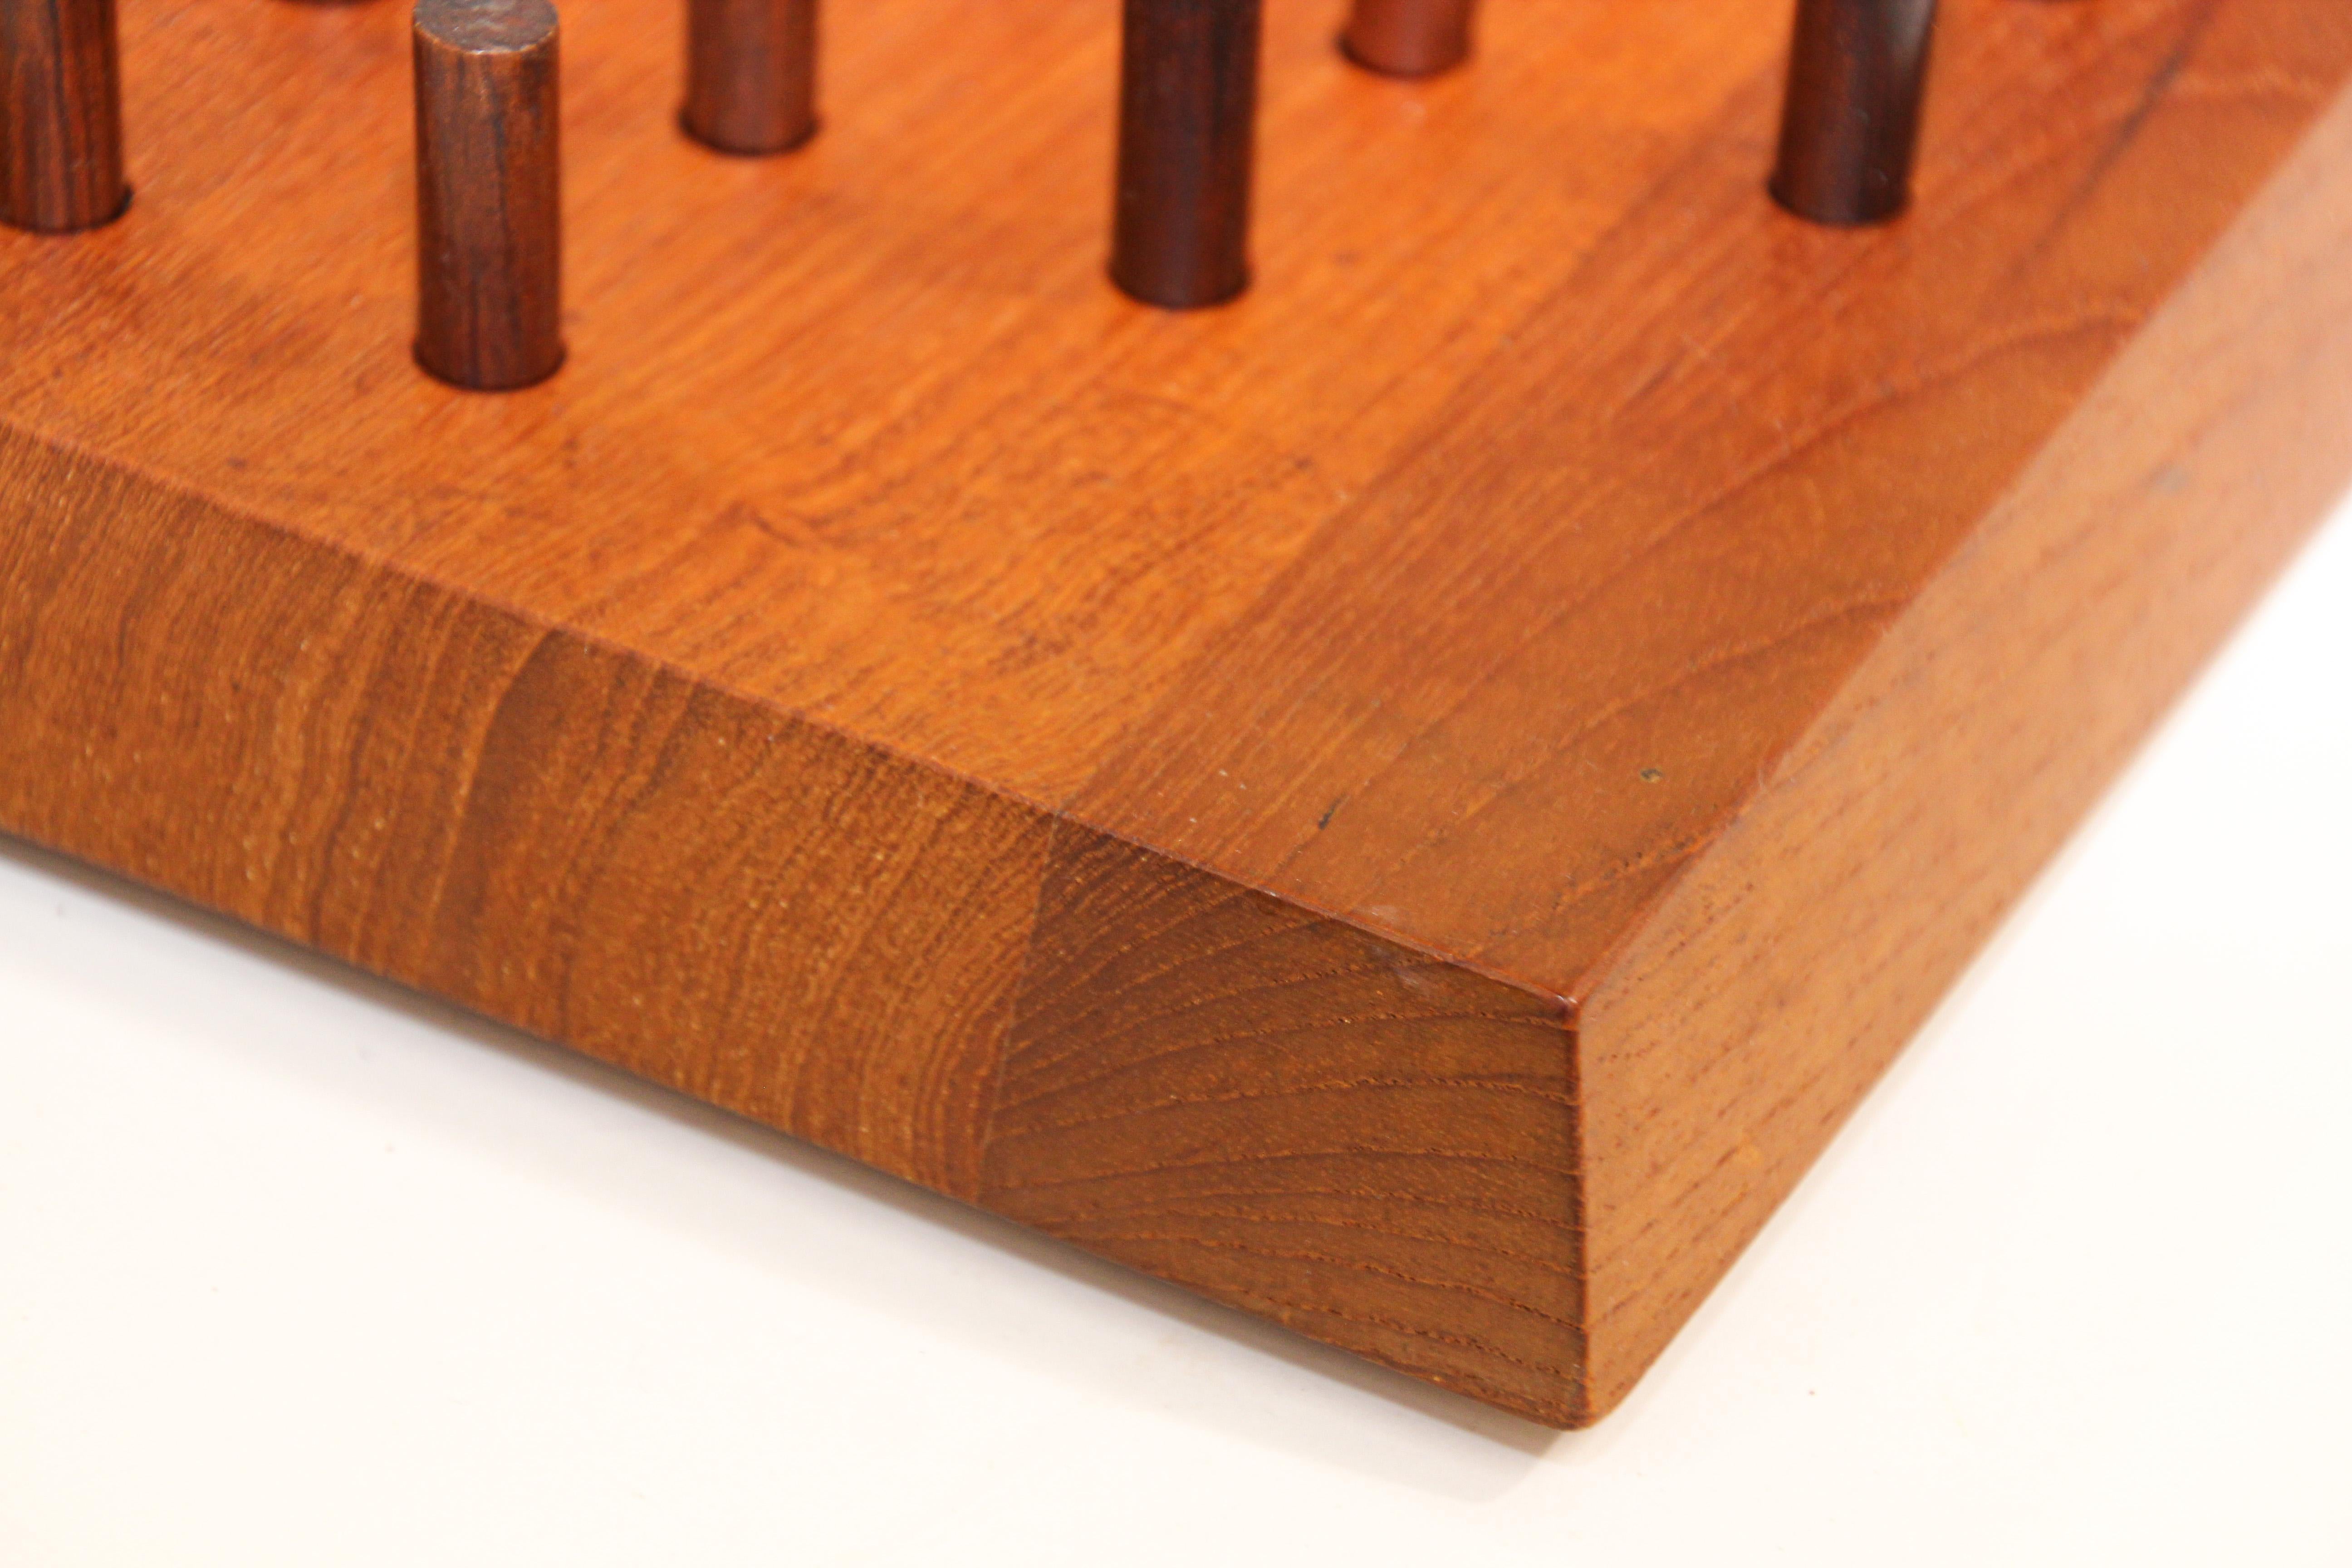 Hand-Crafted Piet Hein 'Solitaire' Teak Board Game for Skjode, Denmark, 1960s For Sale